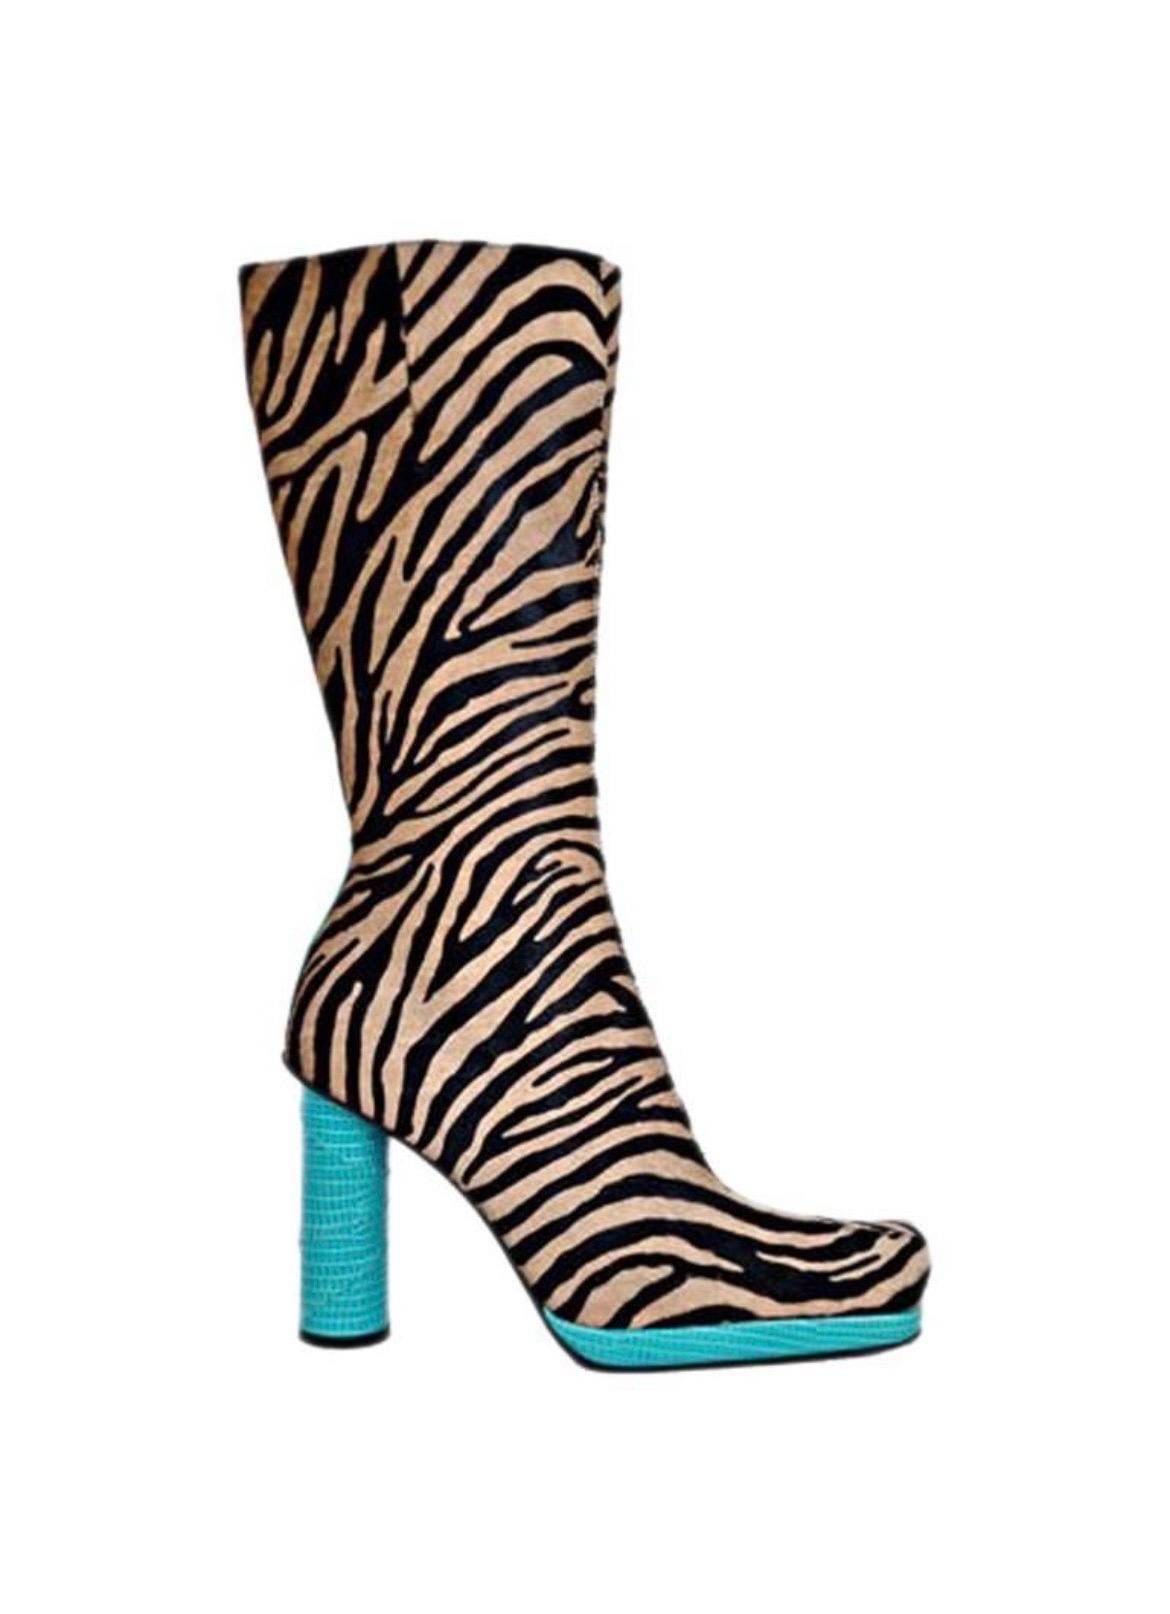 An amazing pair of Gianni Versace runway boots from 1999 Fall/Winter Collection. 
Animal print fur is combined with turquoise lizard skin.  
Leather lining, leather sole.  Side zipper.  
Size 36.5 
Unworn.  
Excellent condition.

Matching runway bag